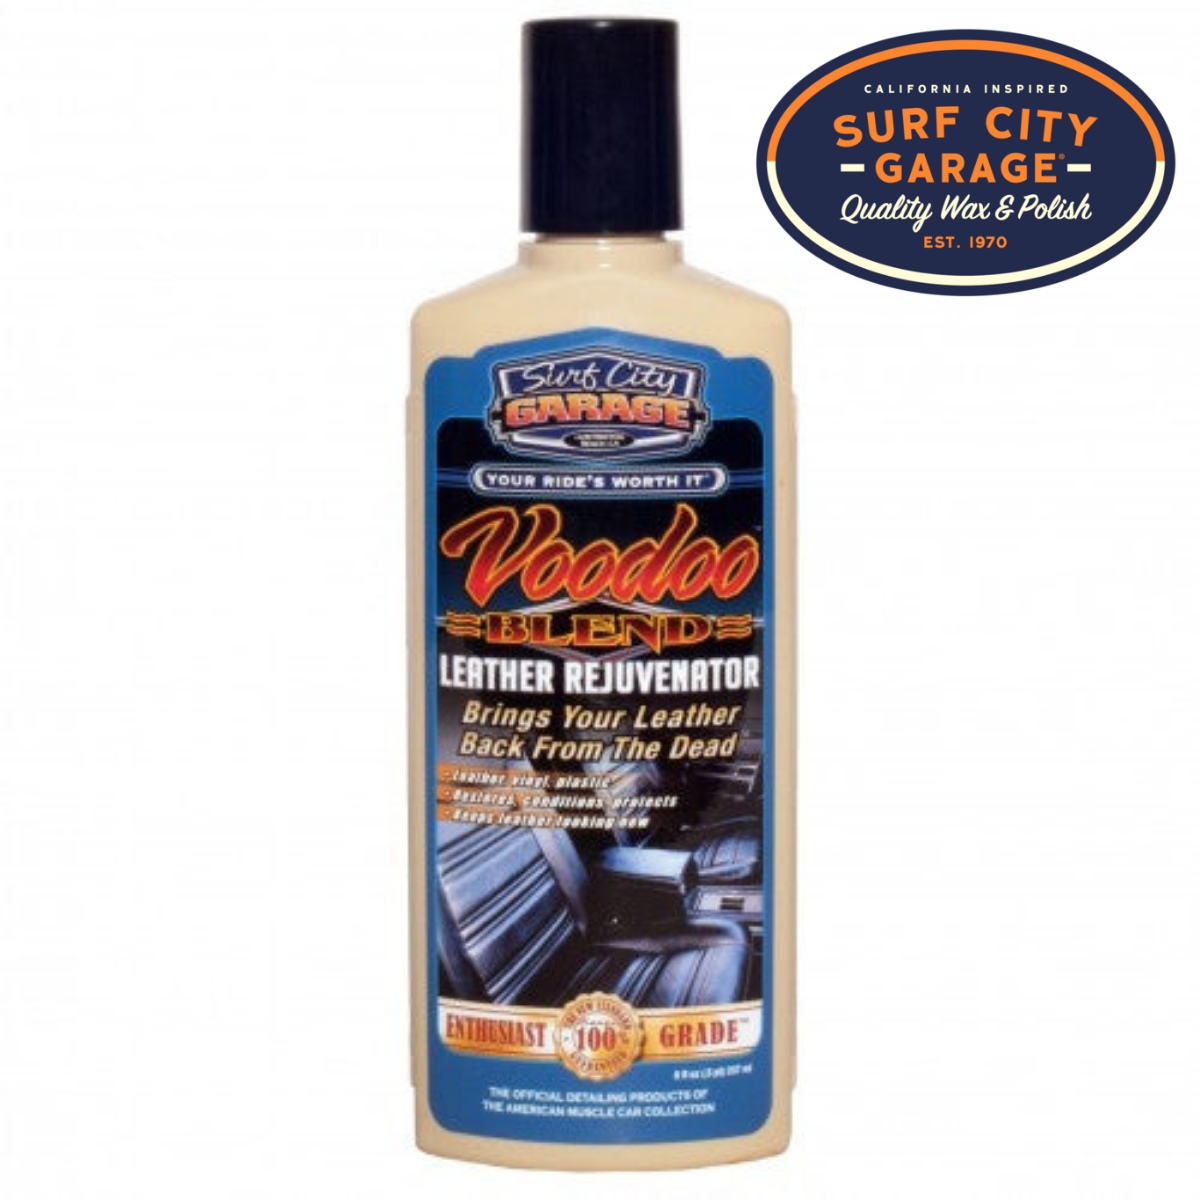 Restore your vehicle’s interior with Surf City’s Voodoo Blend Leather Rejuvenator.